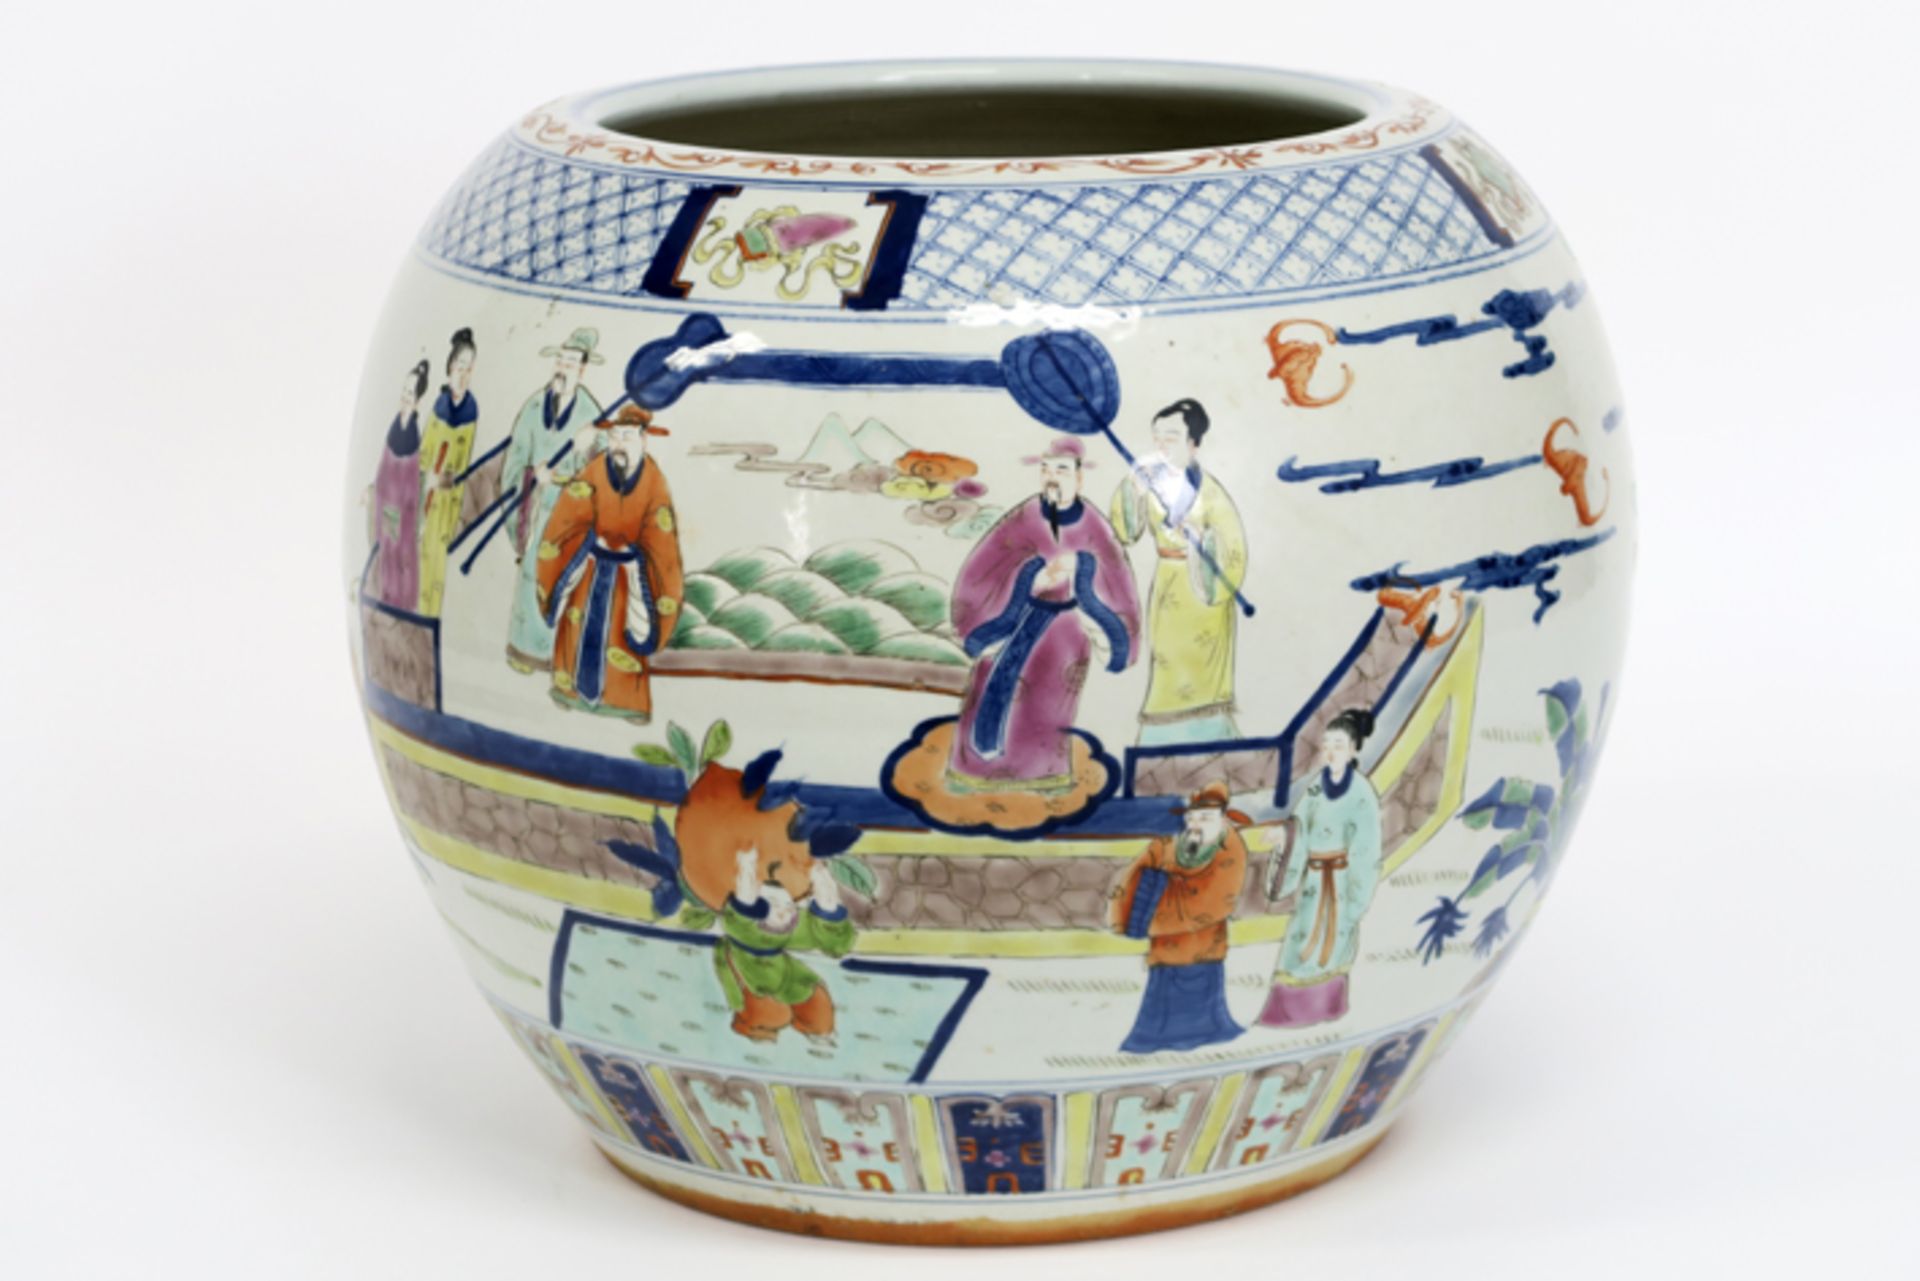 Chinese jardinier in porcelain with a polychrome figures decor - - Vrij grote [...]